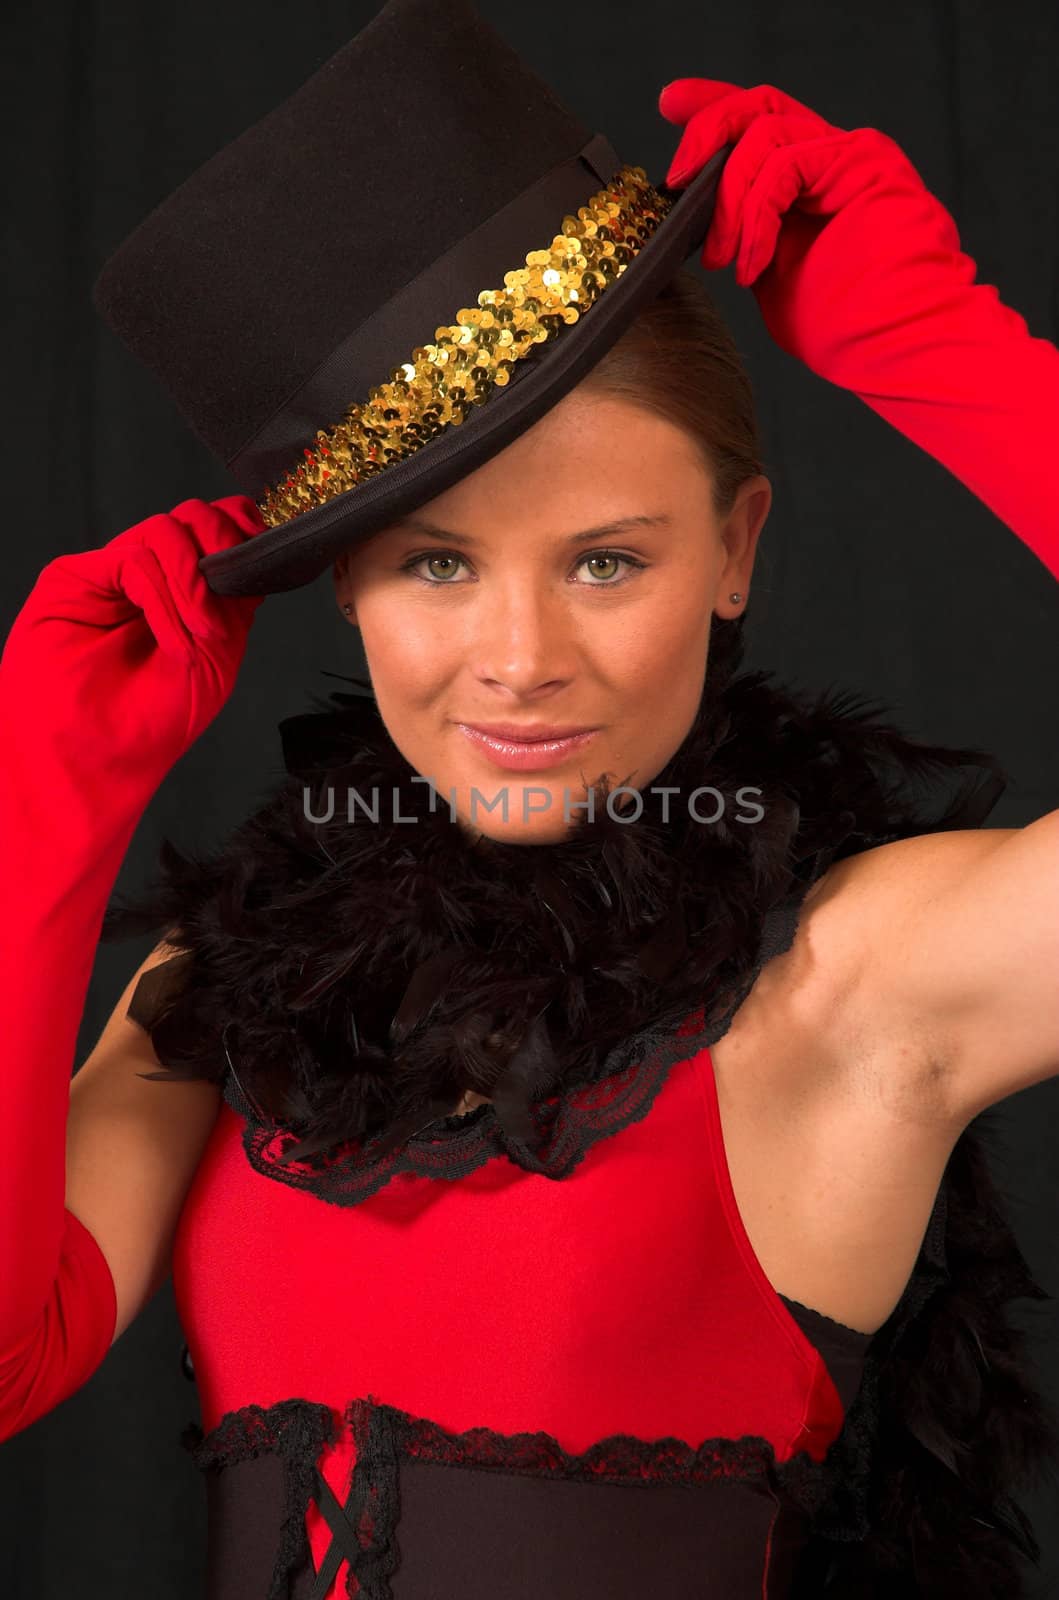 Moulin Rouge model with hat and red gloves holding hat on head with gold band